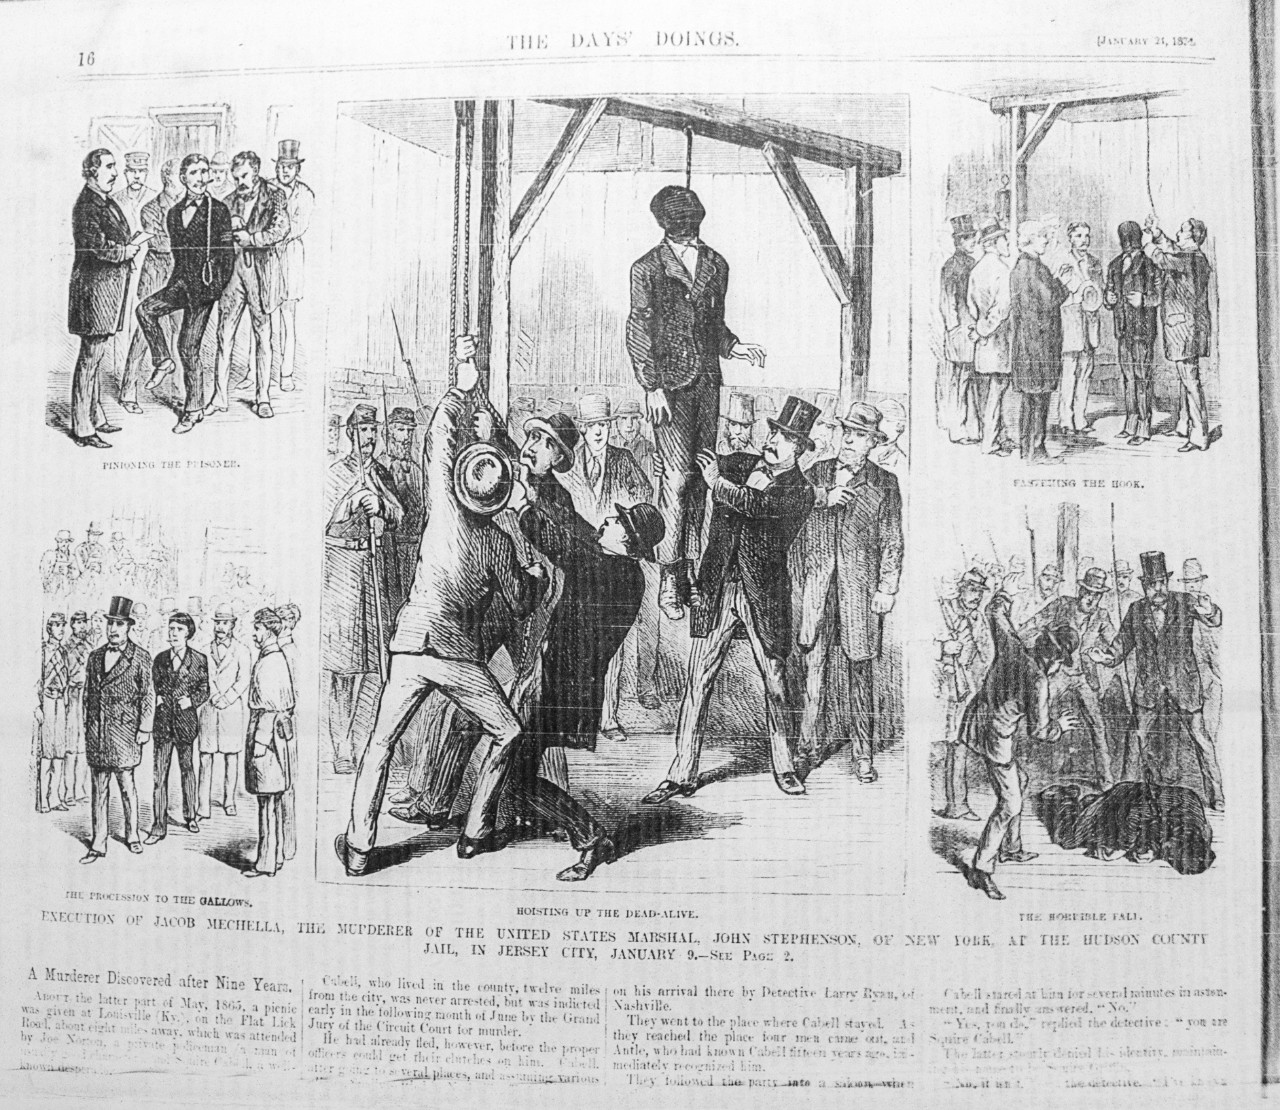 The 1874 execution of Jacob Mechella in New Jersey made international news. Mechella, a Finnish sailor, was convicted of the fatal stabbing of a U.S. deputy marshal.